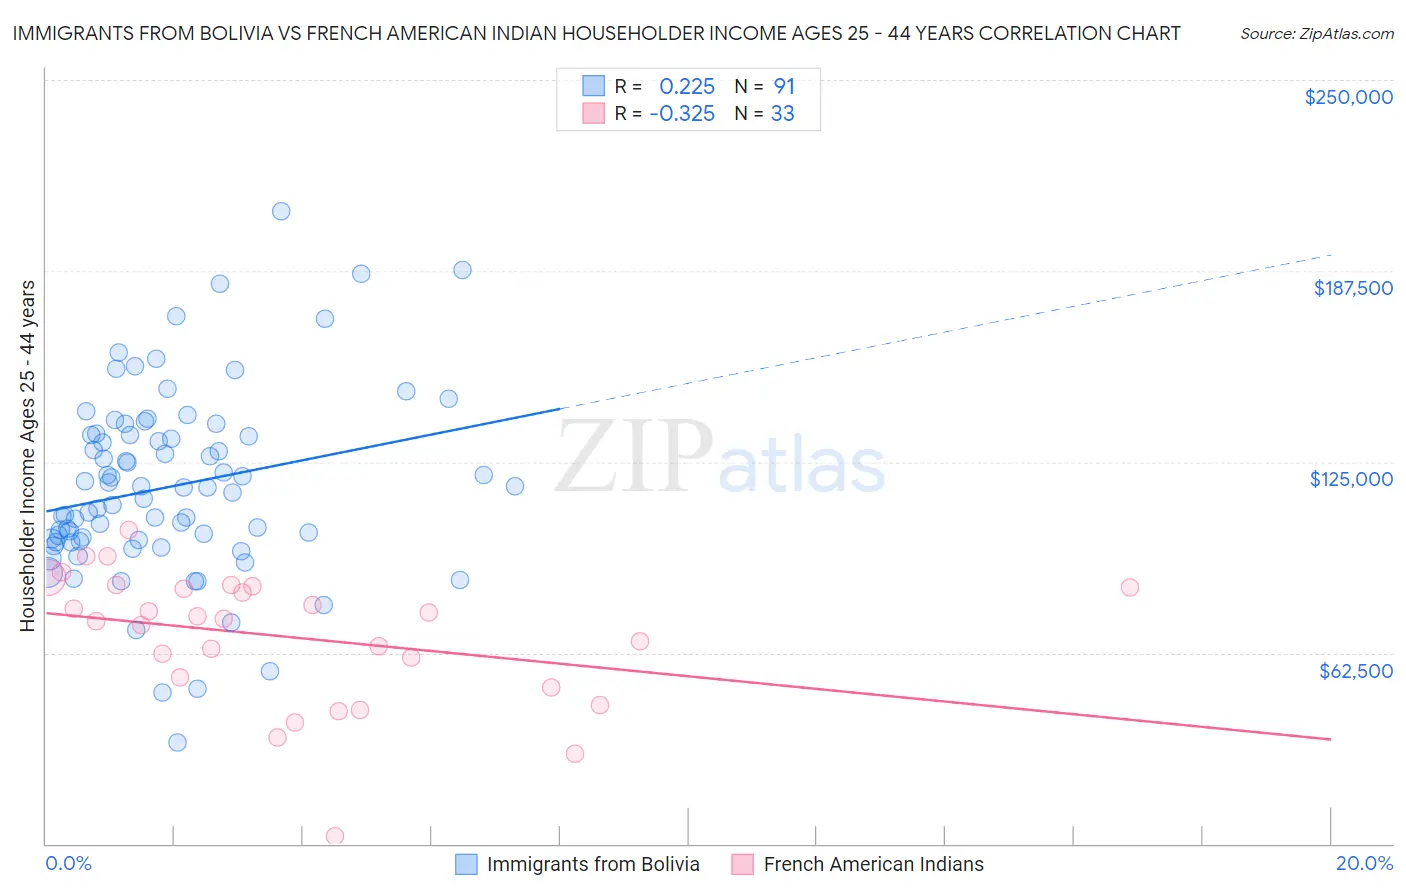 Immigrants from Bolivia vs French American Indian Householder Income Ages 25 - 44 years